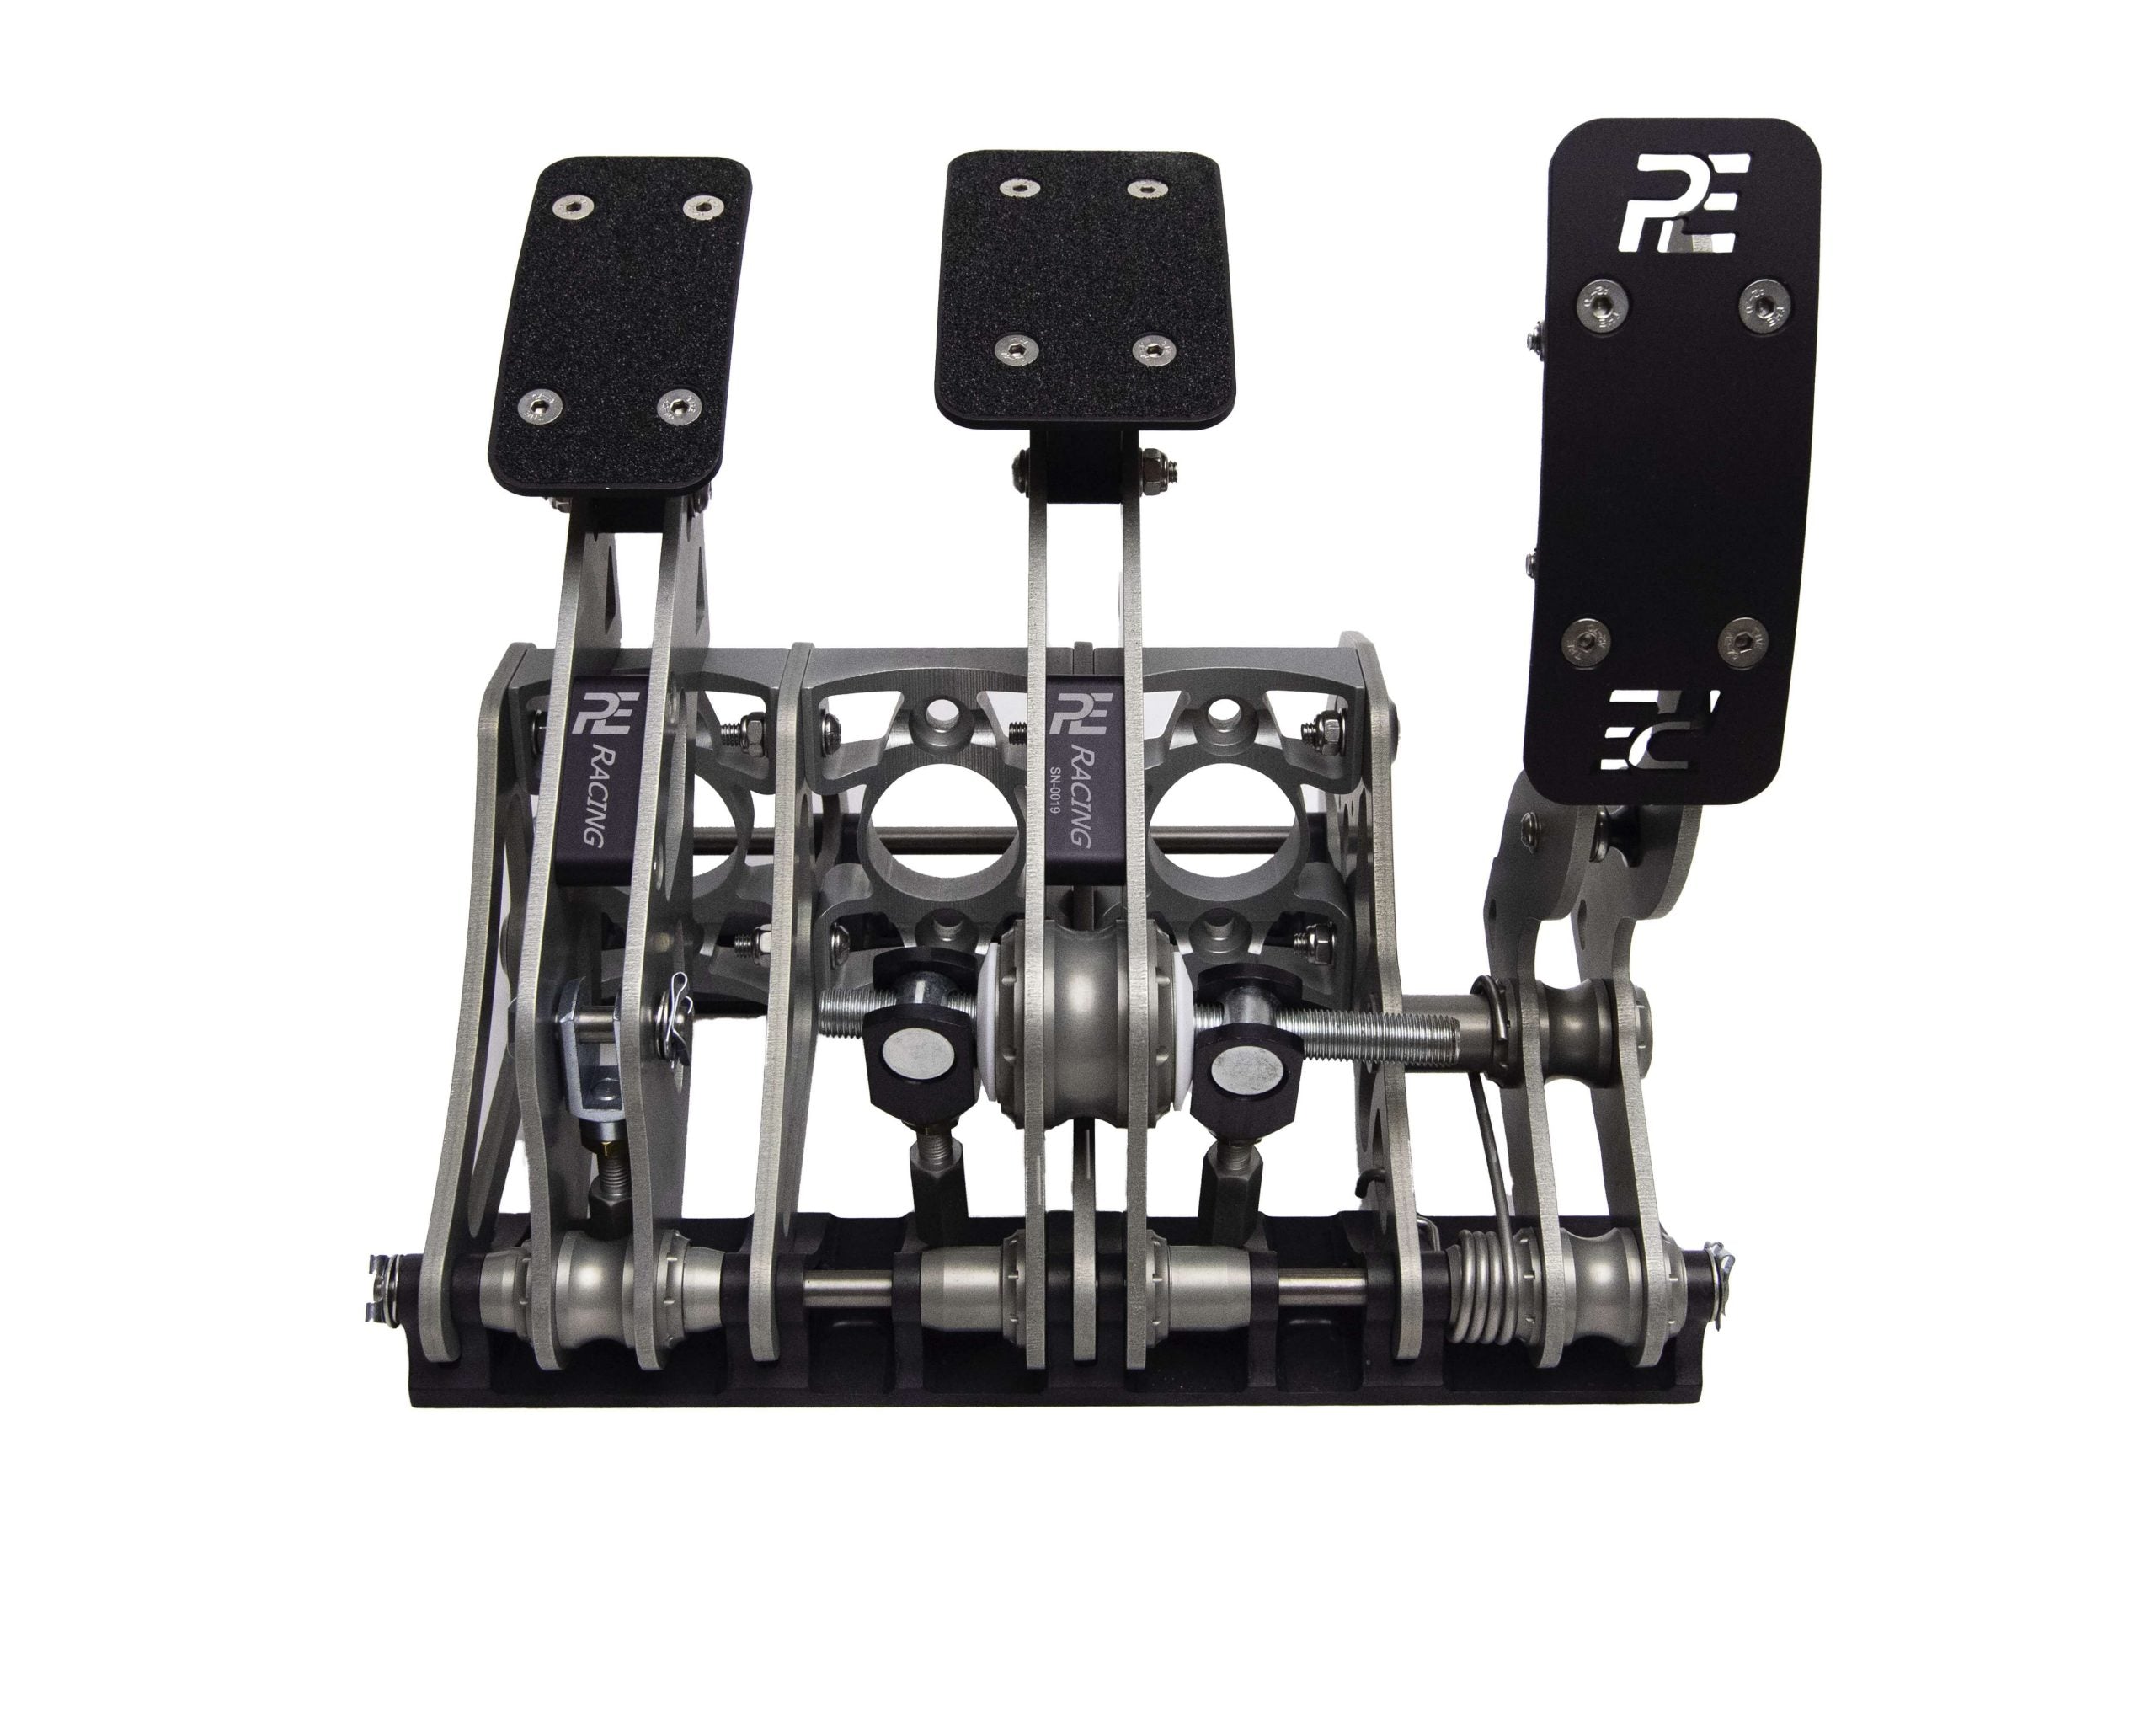 PE Racing Pedal Box assembly aftermarket motorsport smaller pedal ratio